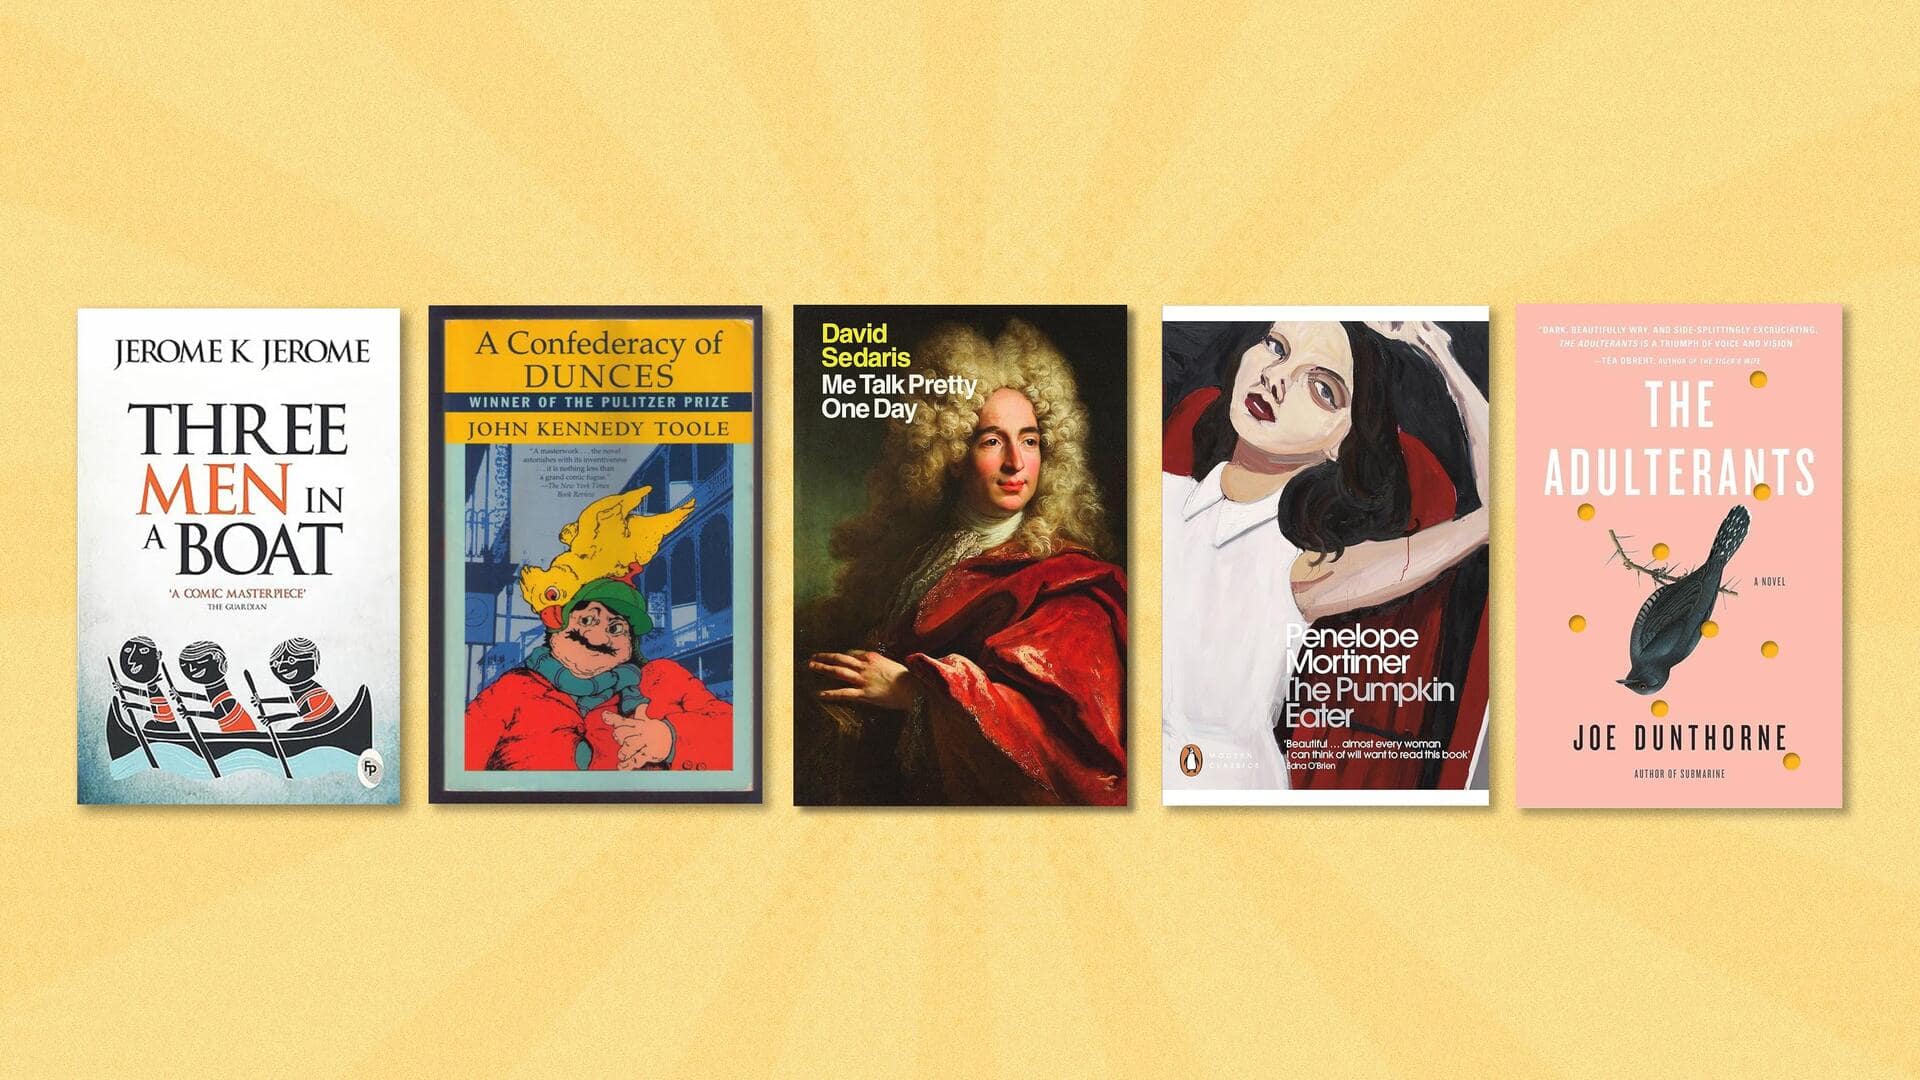 These novels will make you laugh like a drain